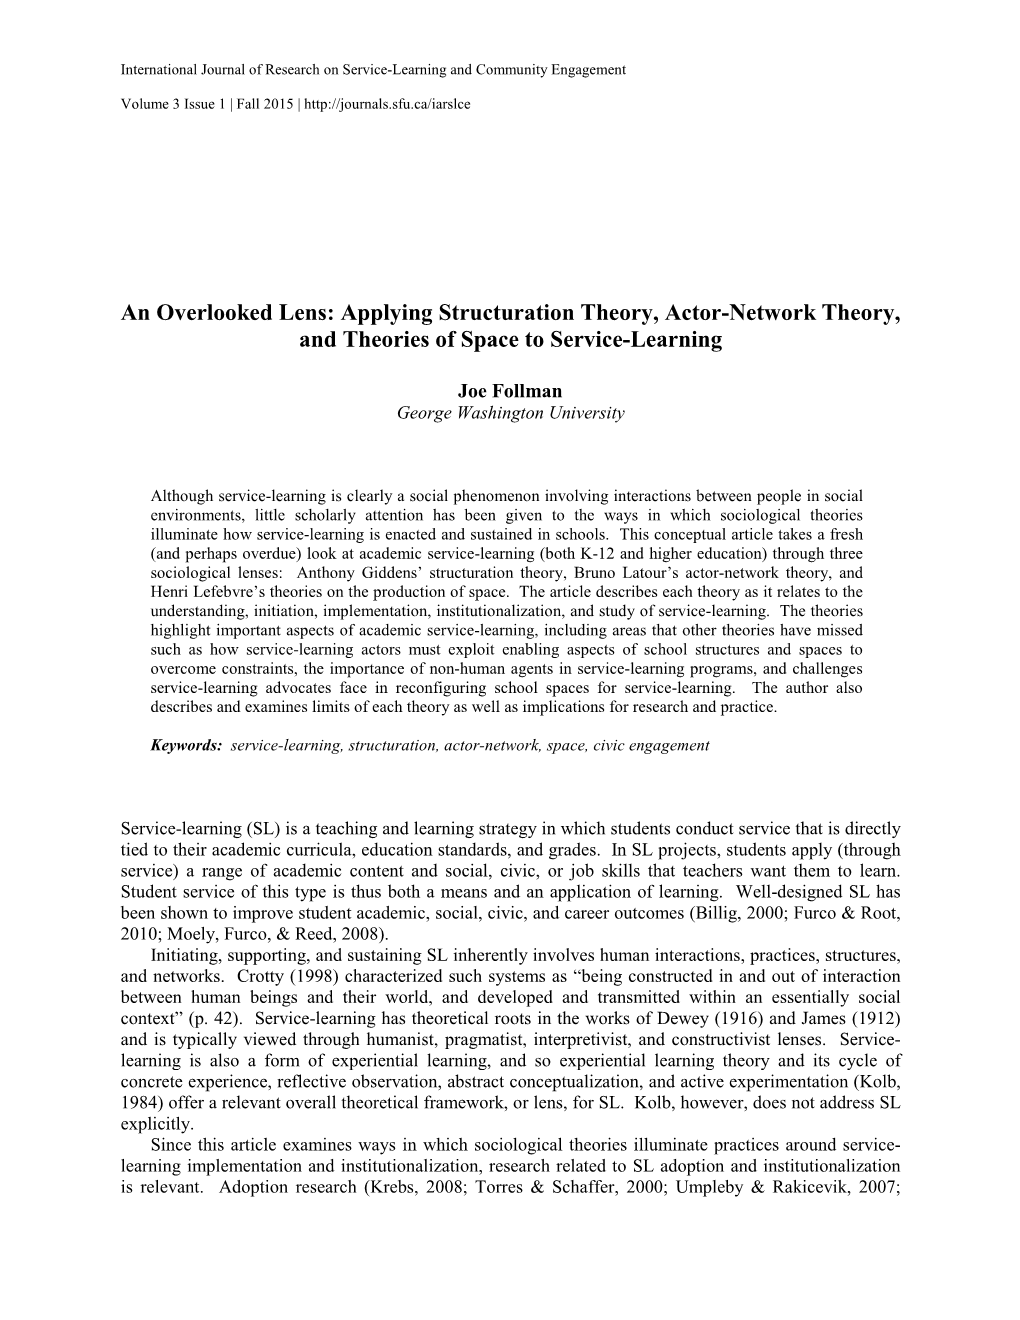 An Overlooked Lens: Applying Structuration Theory, Actor-Network Theory, and Theories of Space to Service-Learning